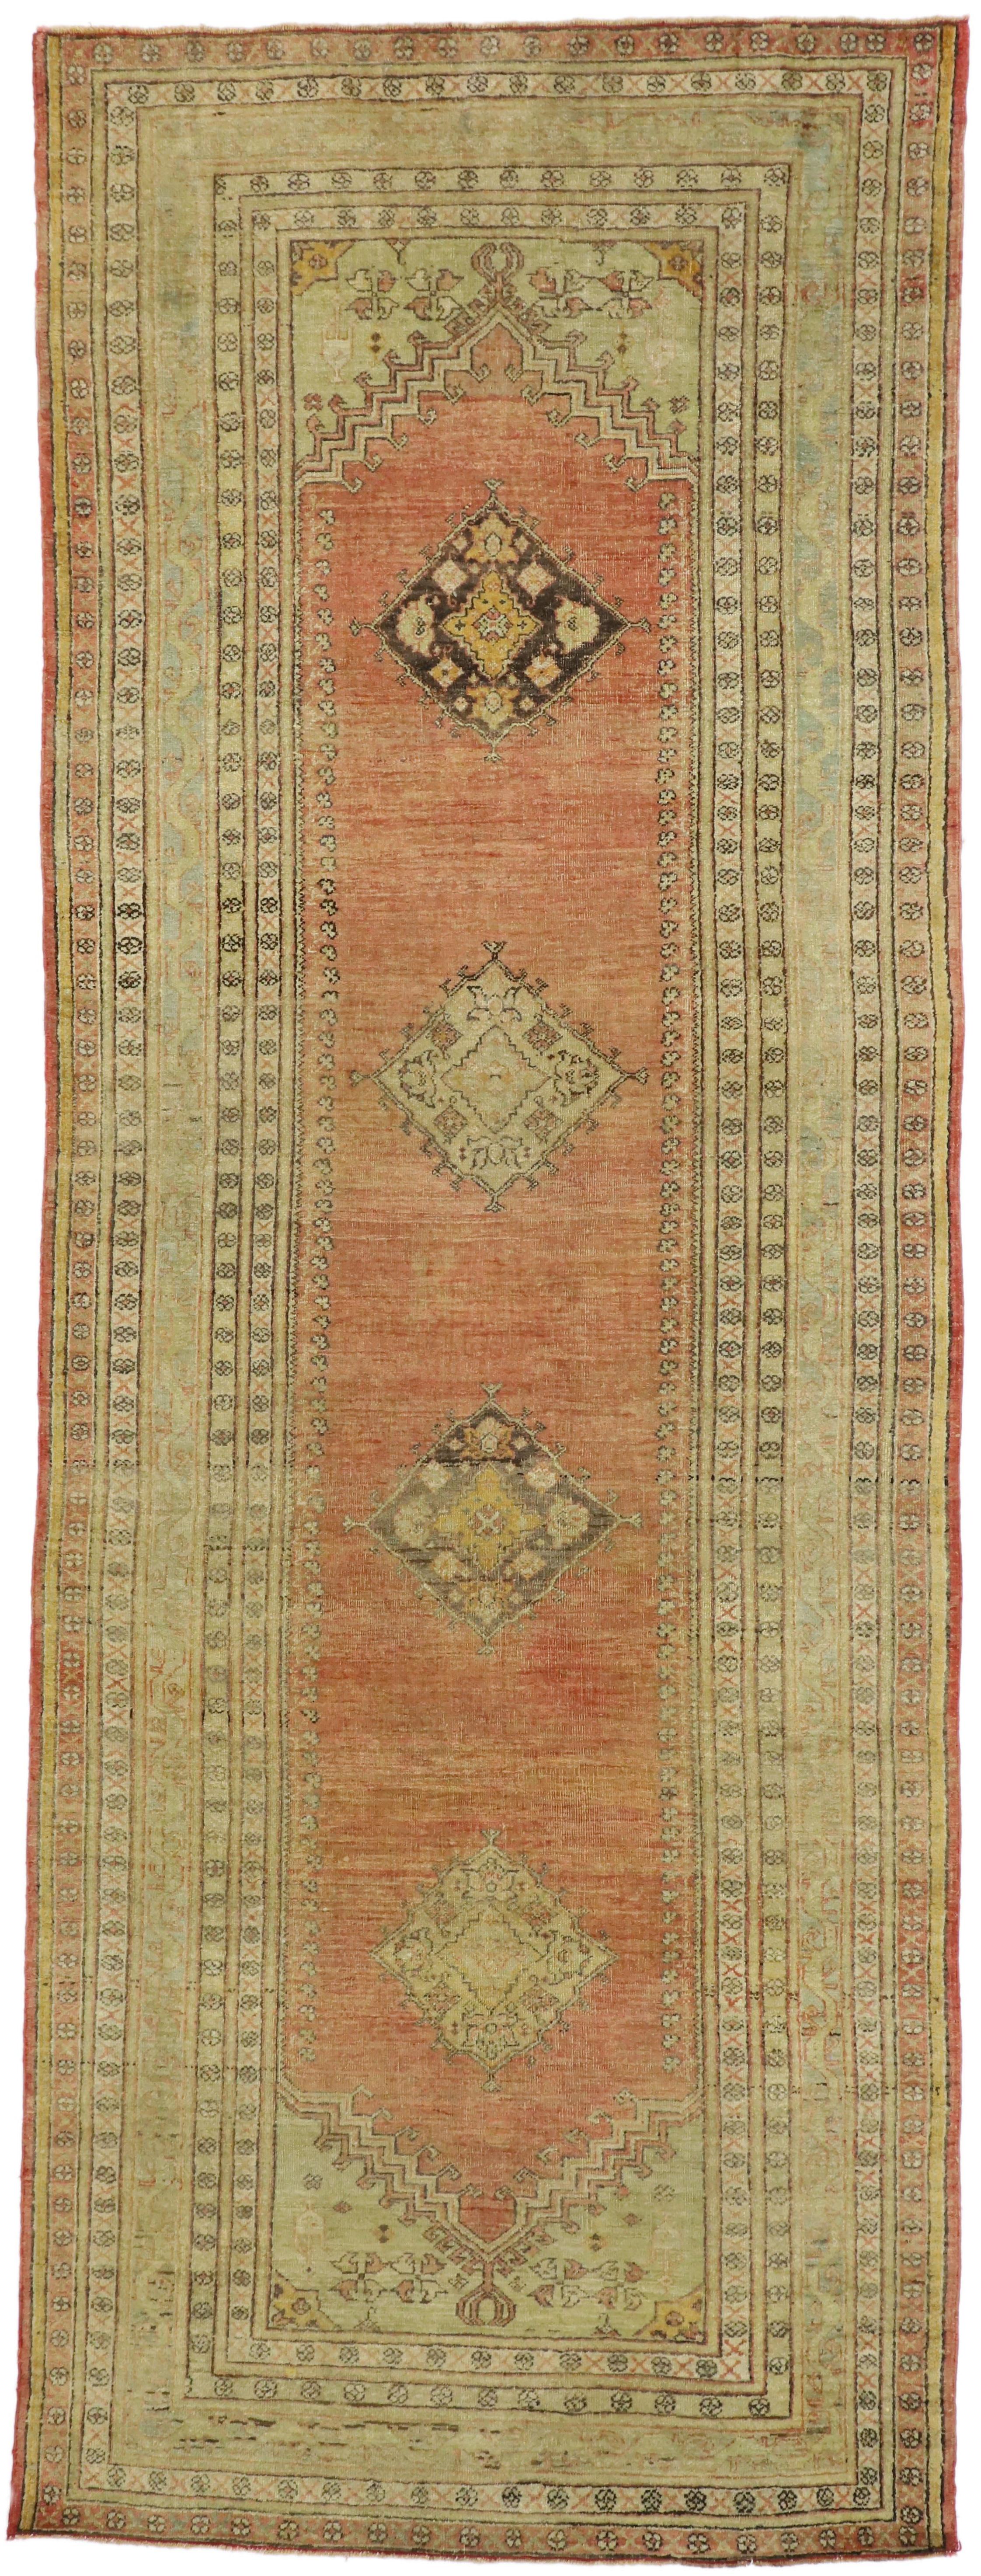 52250, vintage Turkish Oushak runner with soft muted colors. Rustic and refined, this hand knotted wool vintage Turkish Oushak runner beautifully embodies Mission style and rustic vibes. The open and abrashed field highlights four diamond-shaped